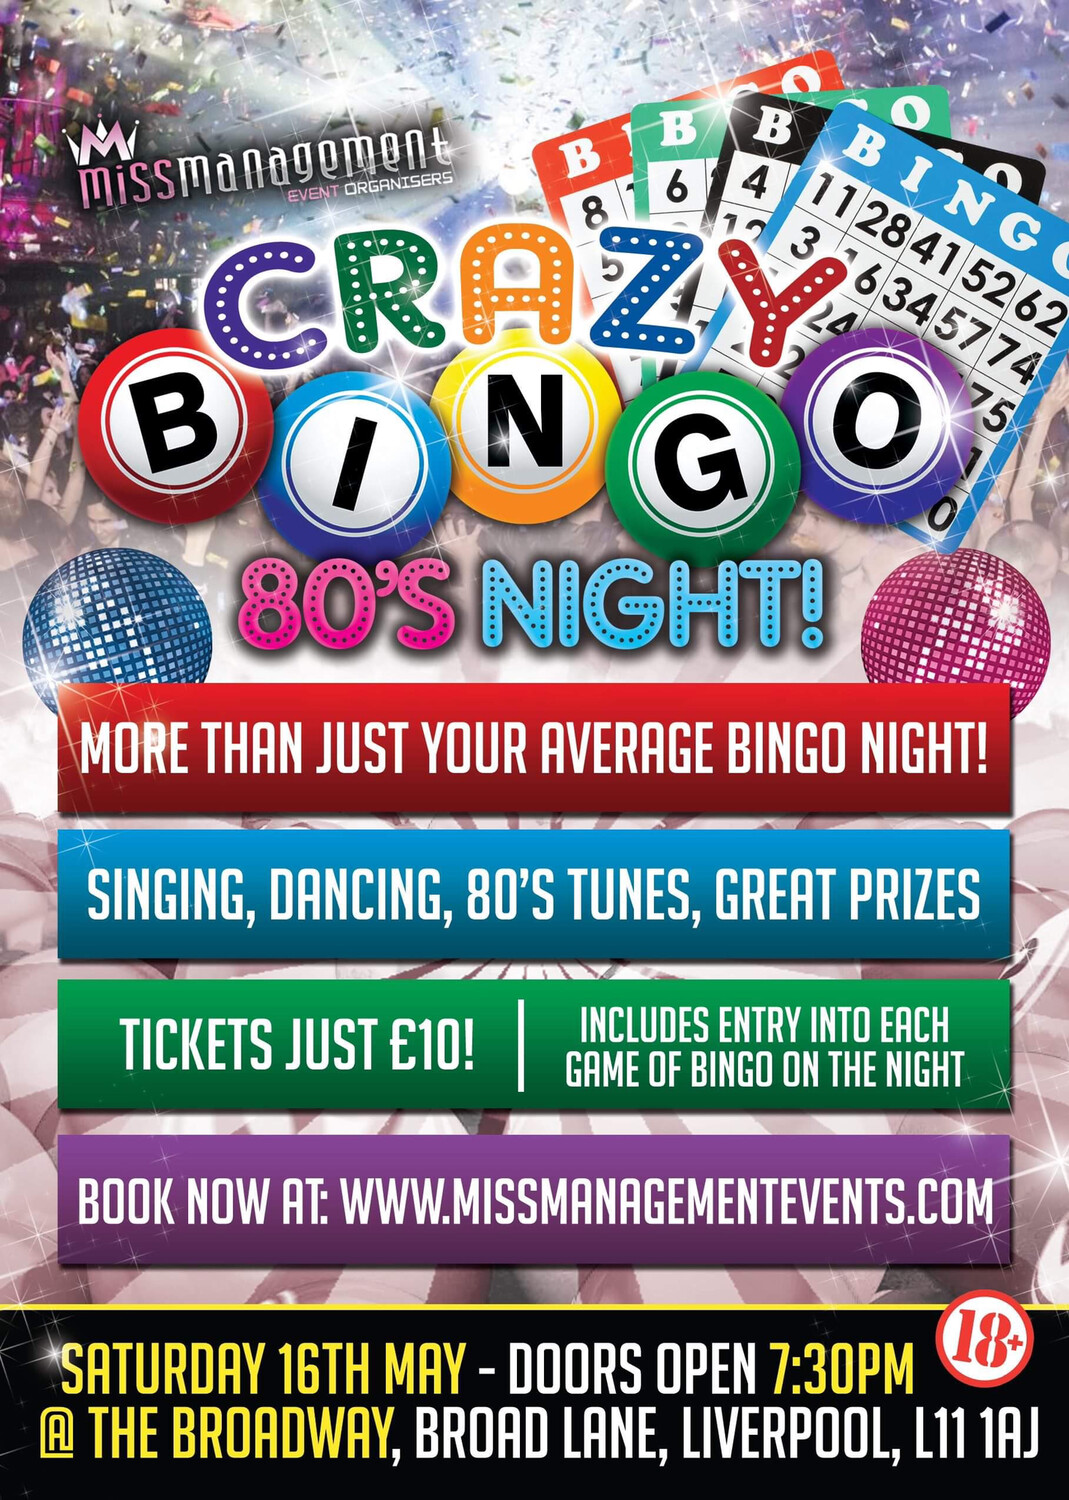 (CB002) 'Crazy Bingo' 80’s Theme: Table For Two (Liverpool) Saturday 16th May 2020